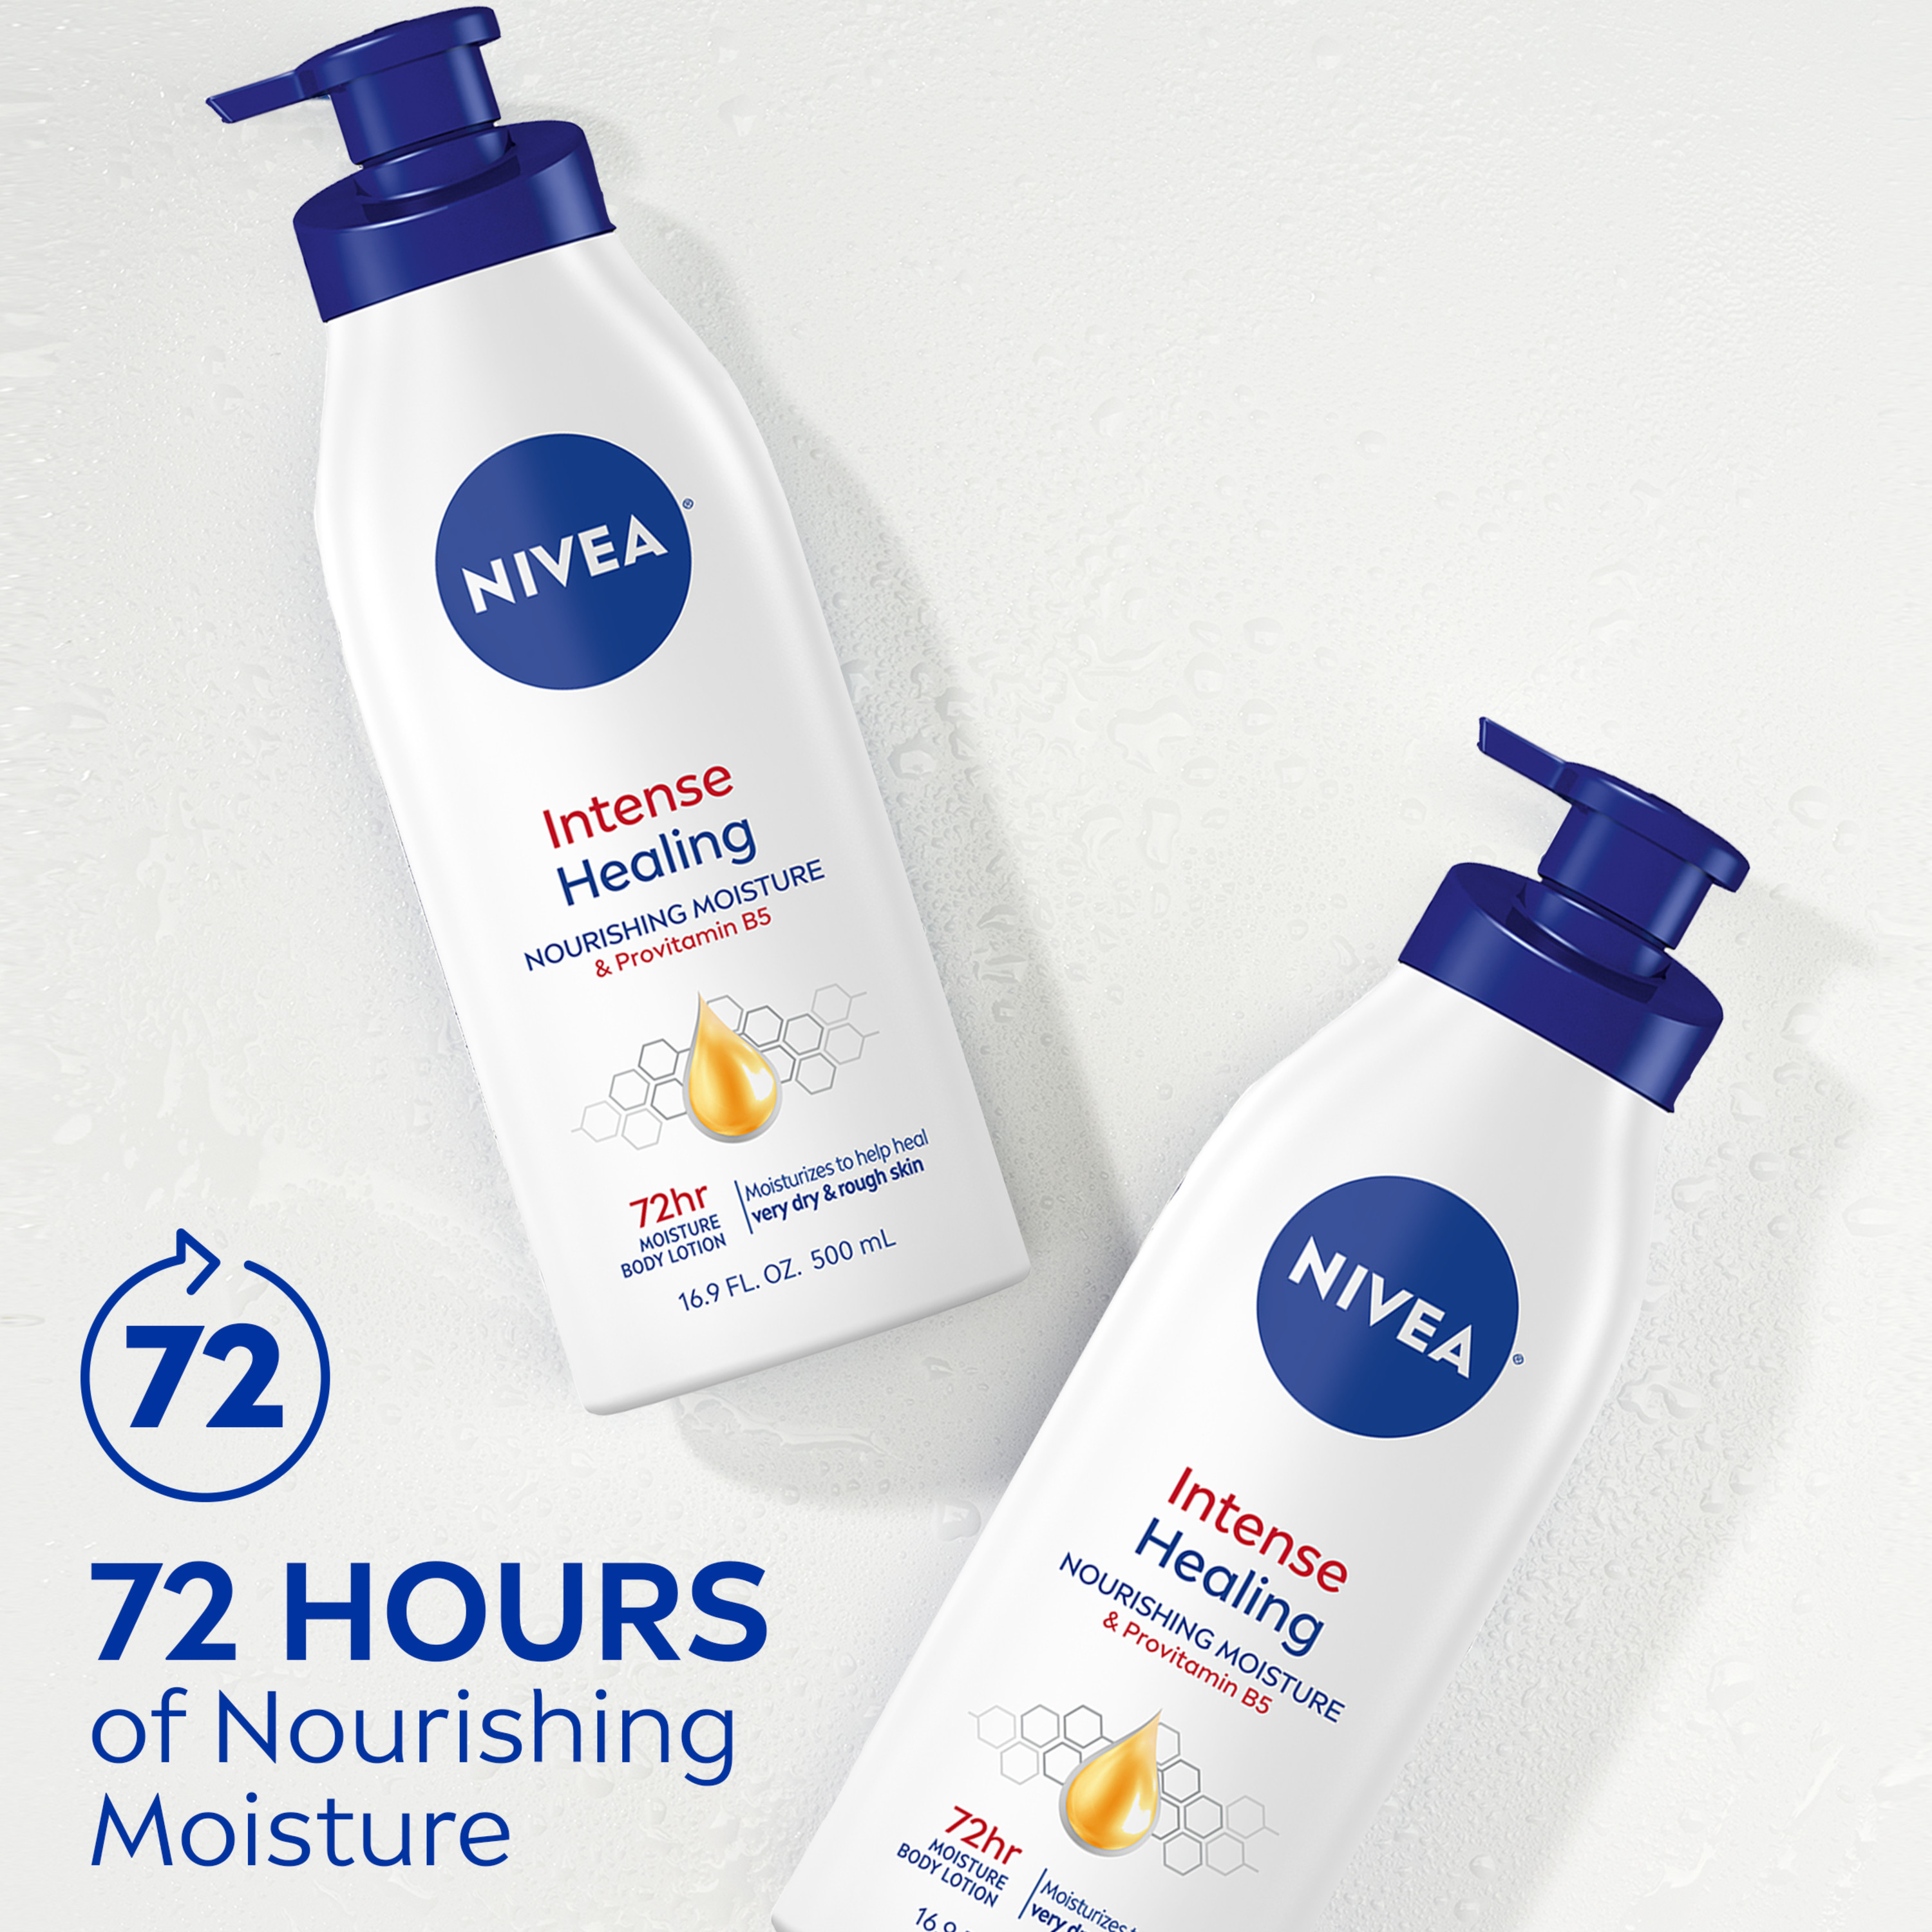 NIVEA Intense Healing Body Lotion, 72 Hour Moisture for Dry to Very Dry Skin, 16.9 Fl Oz Pump Bottle - image 5 of 12